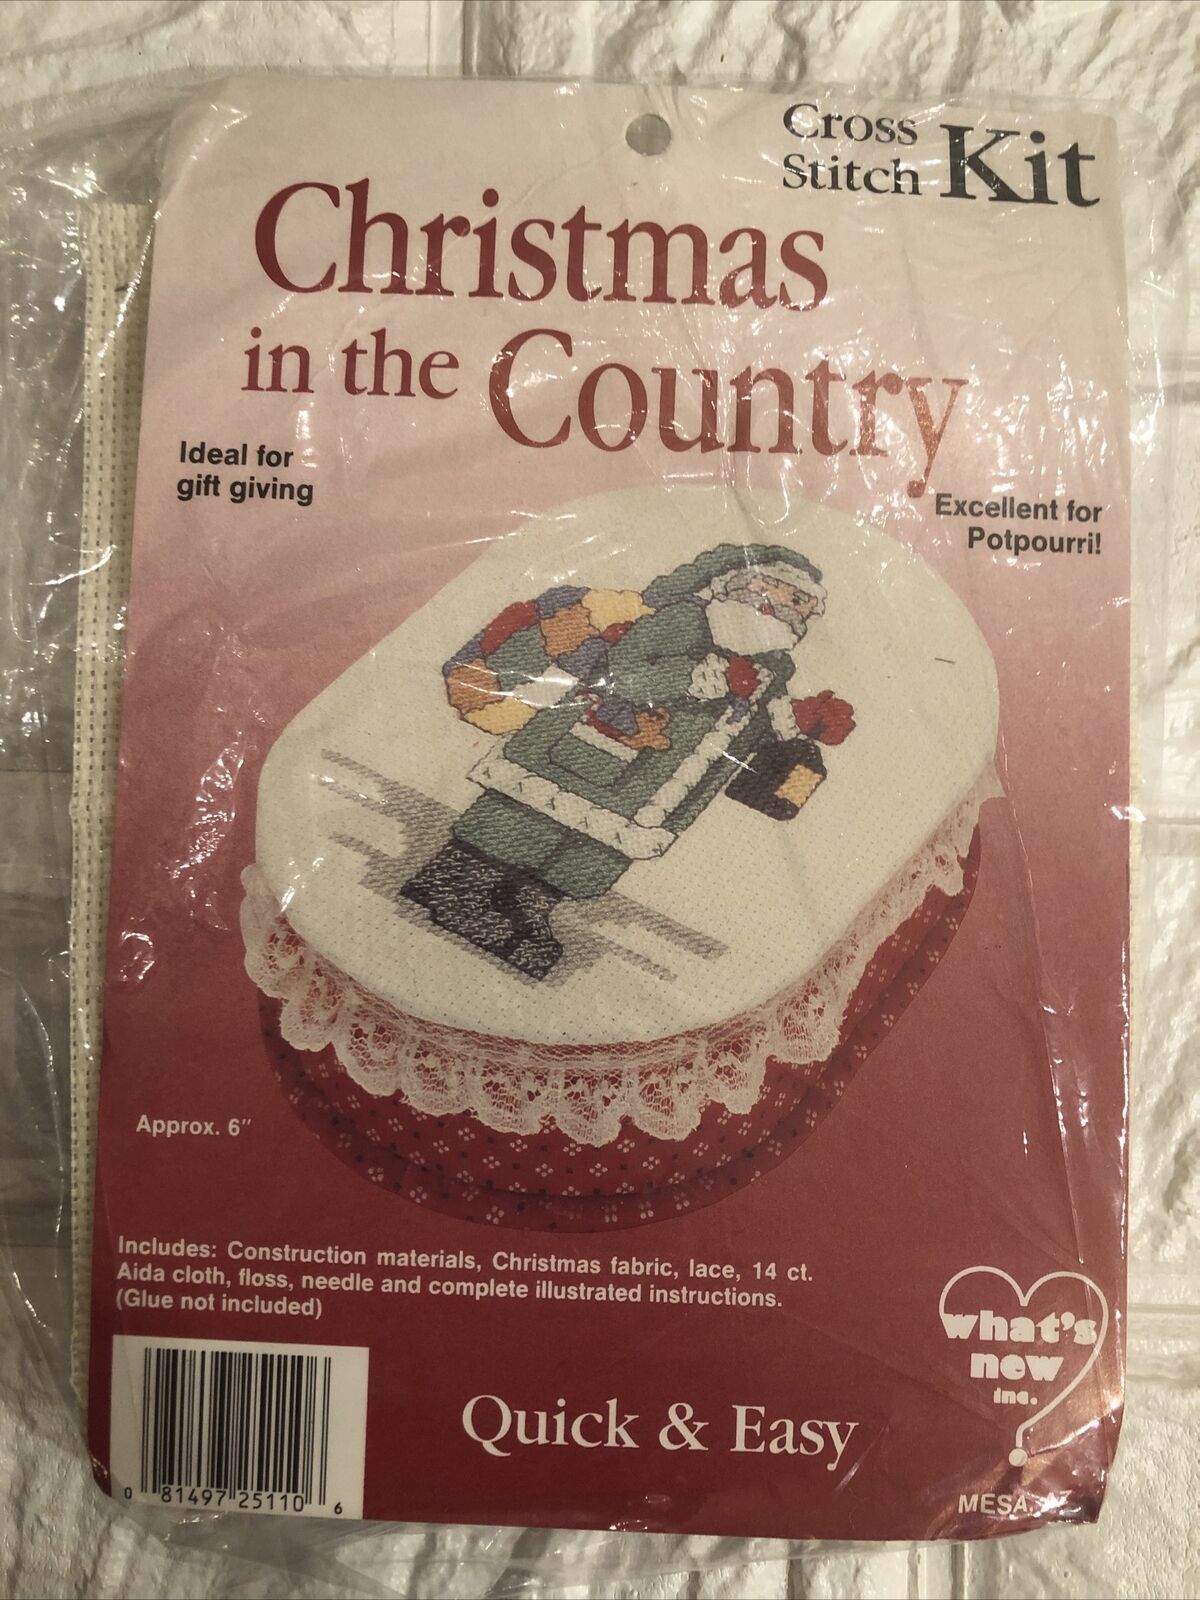 Christmas In The Country Cross Stitch Kit approximately 6" - $16.82